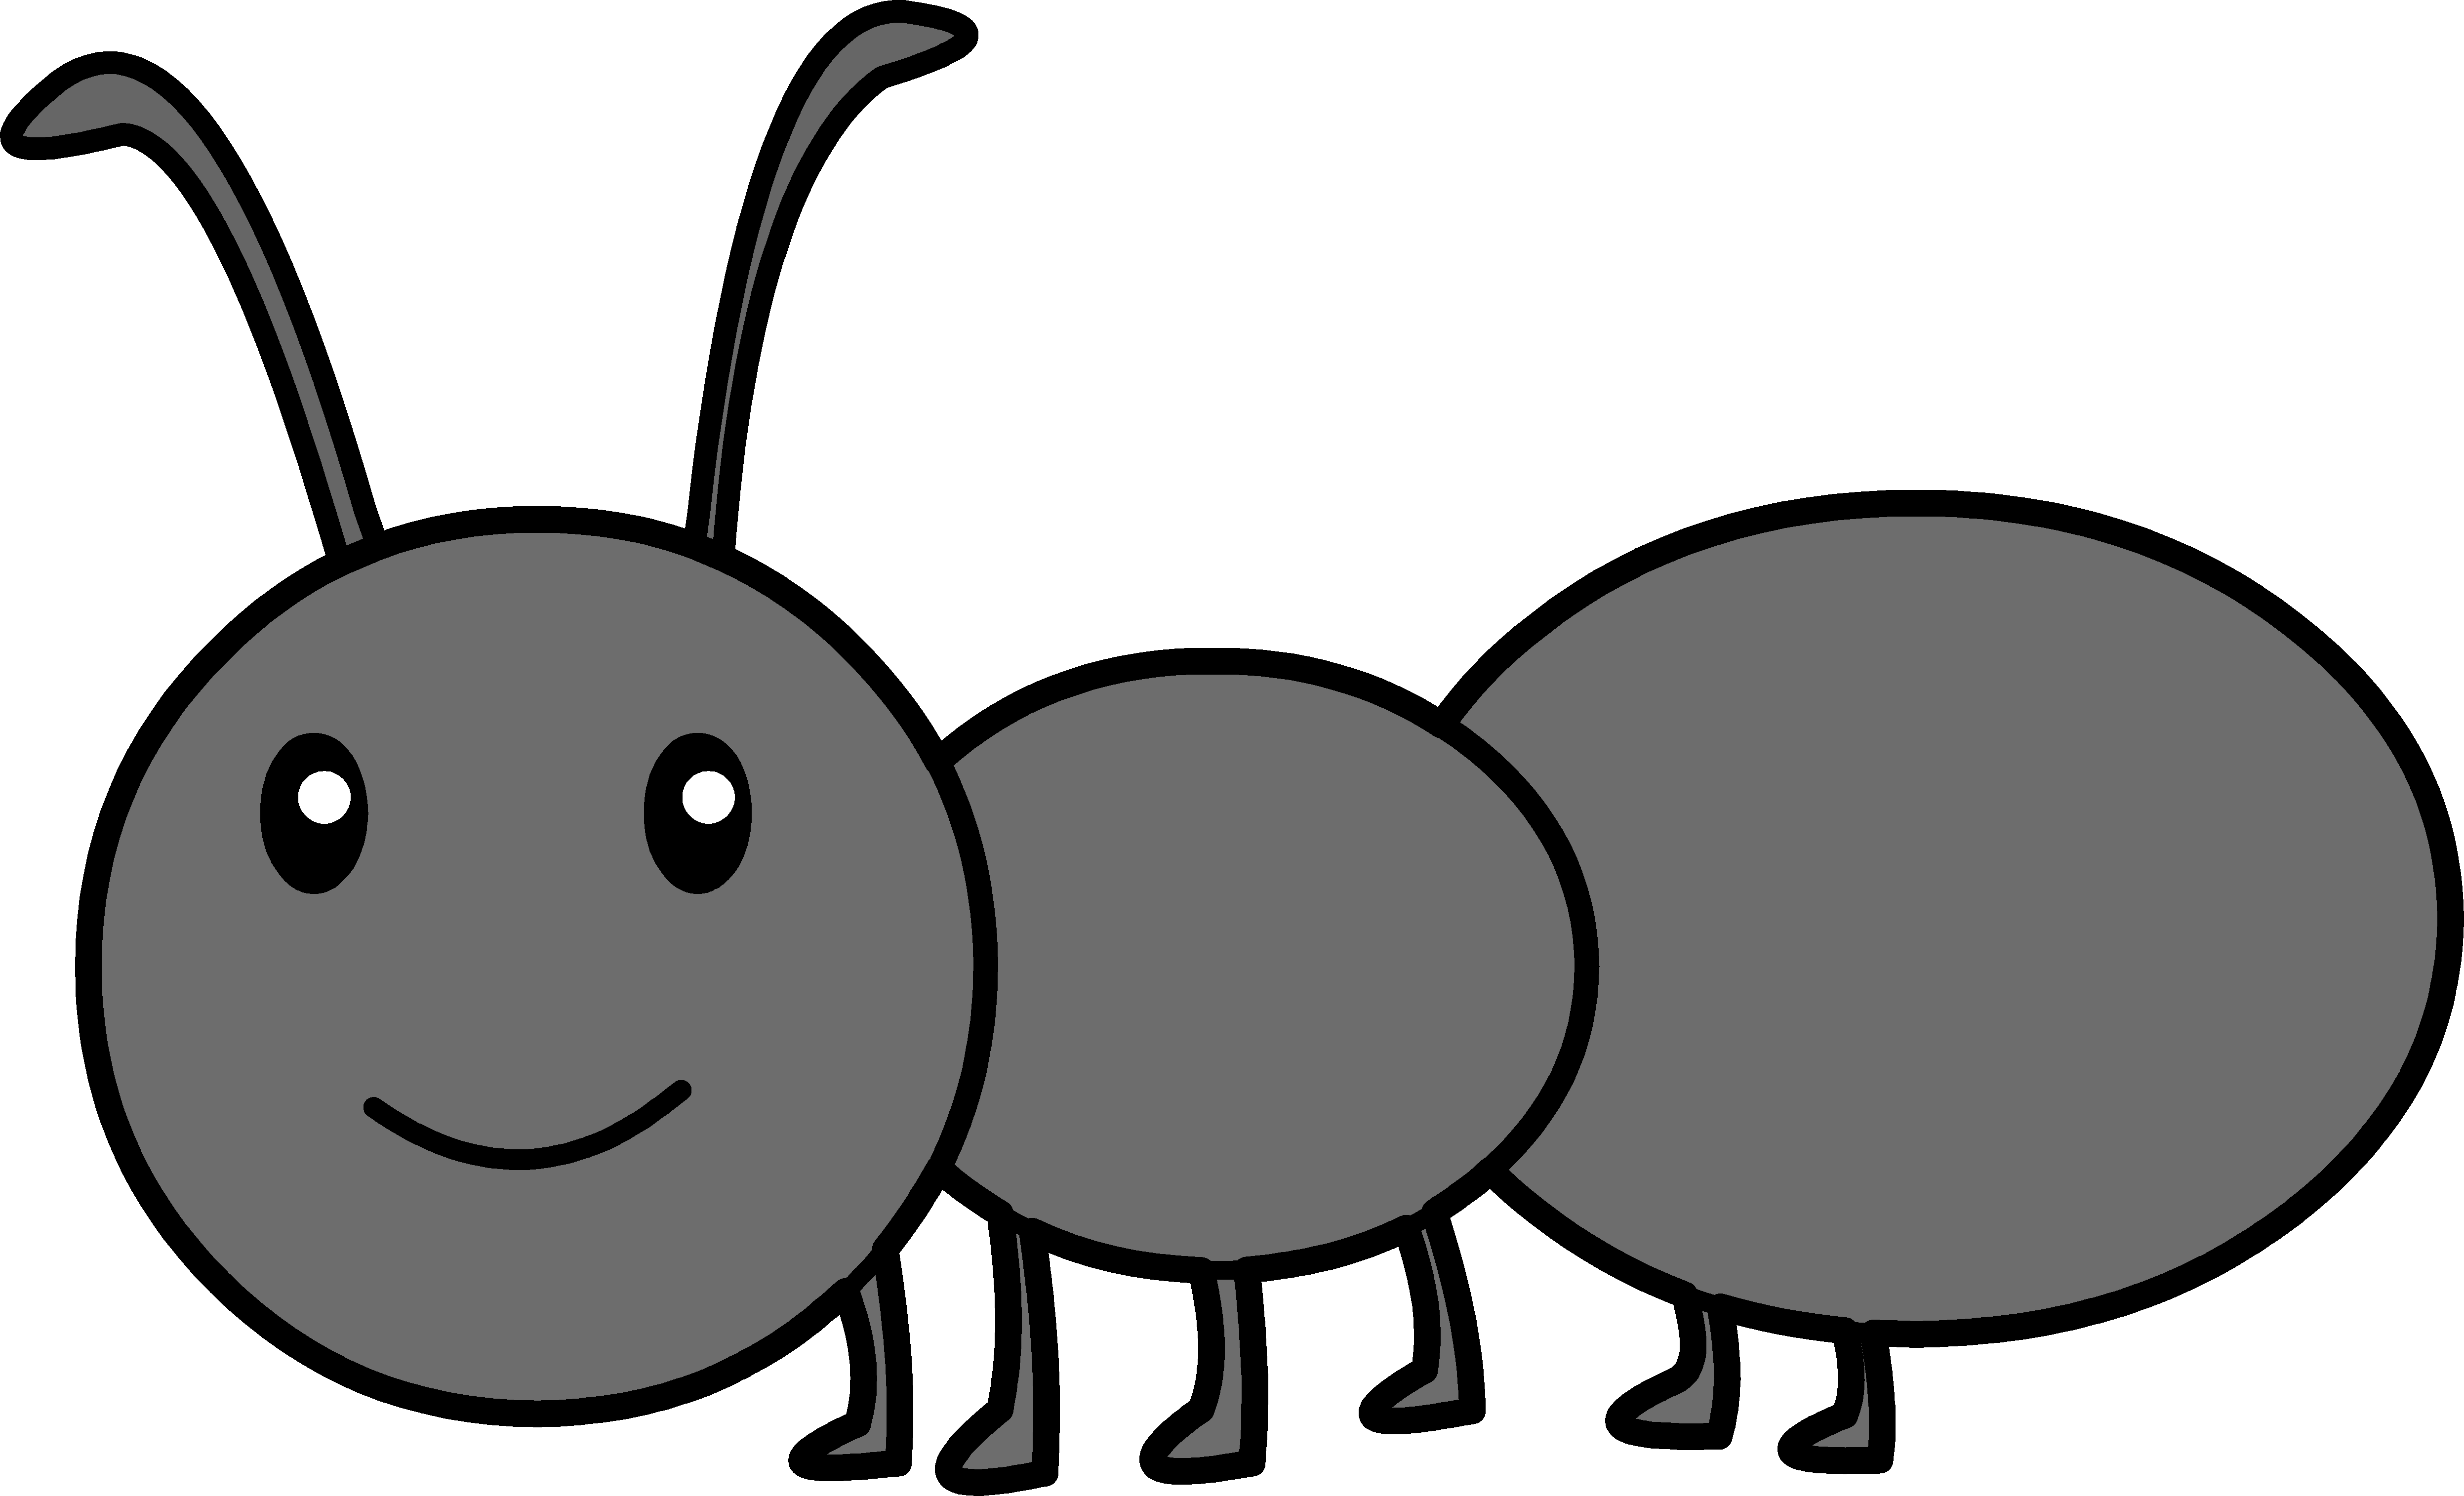 Ants clipart #9, Download drawings